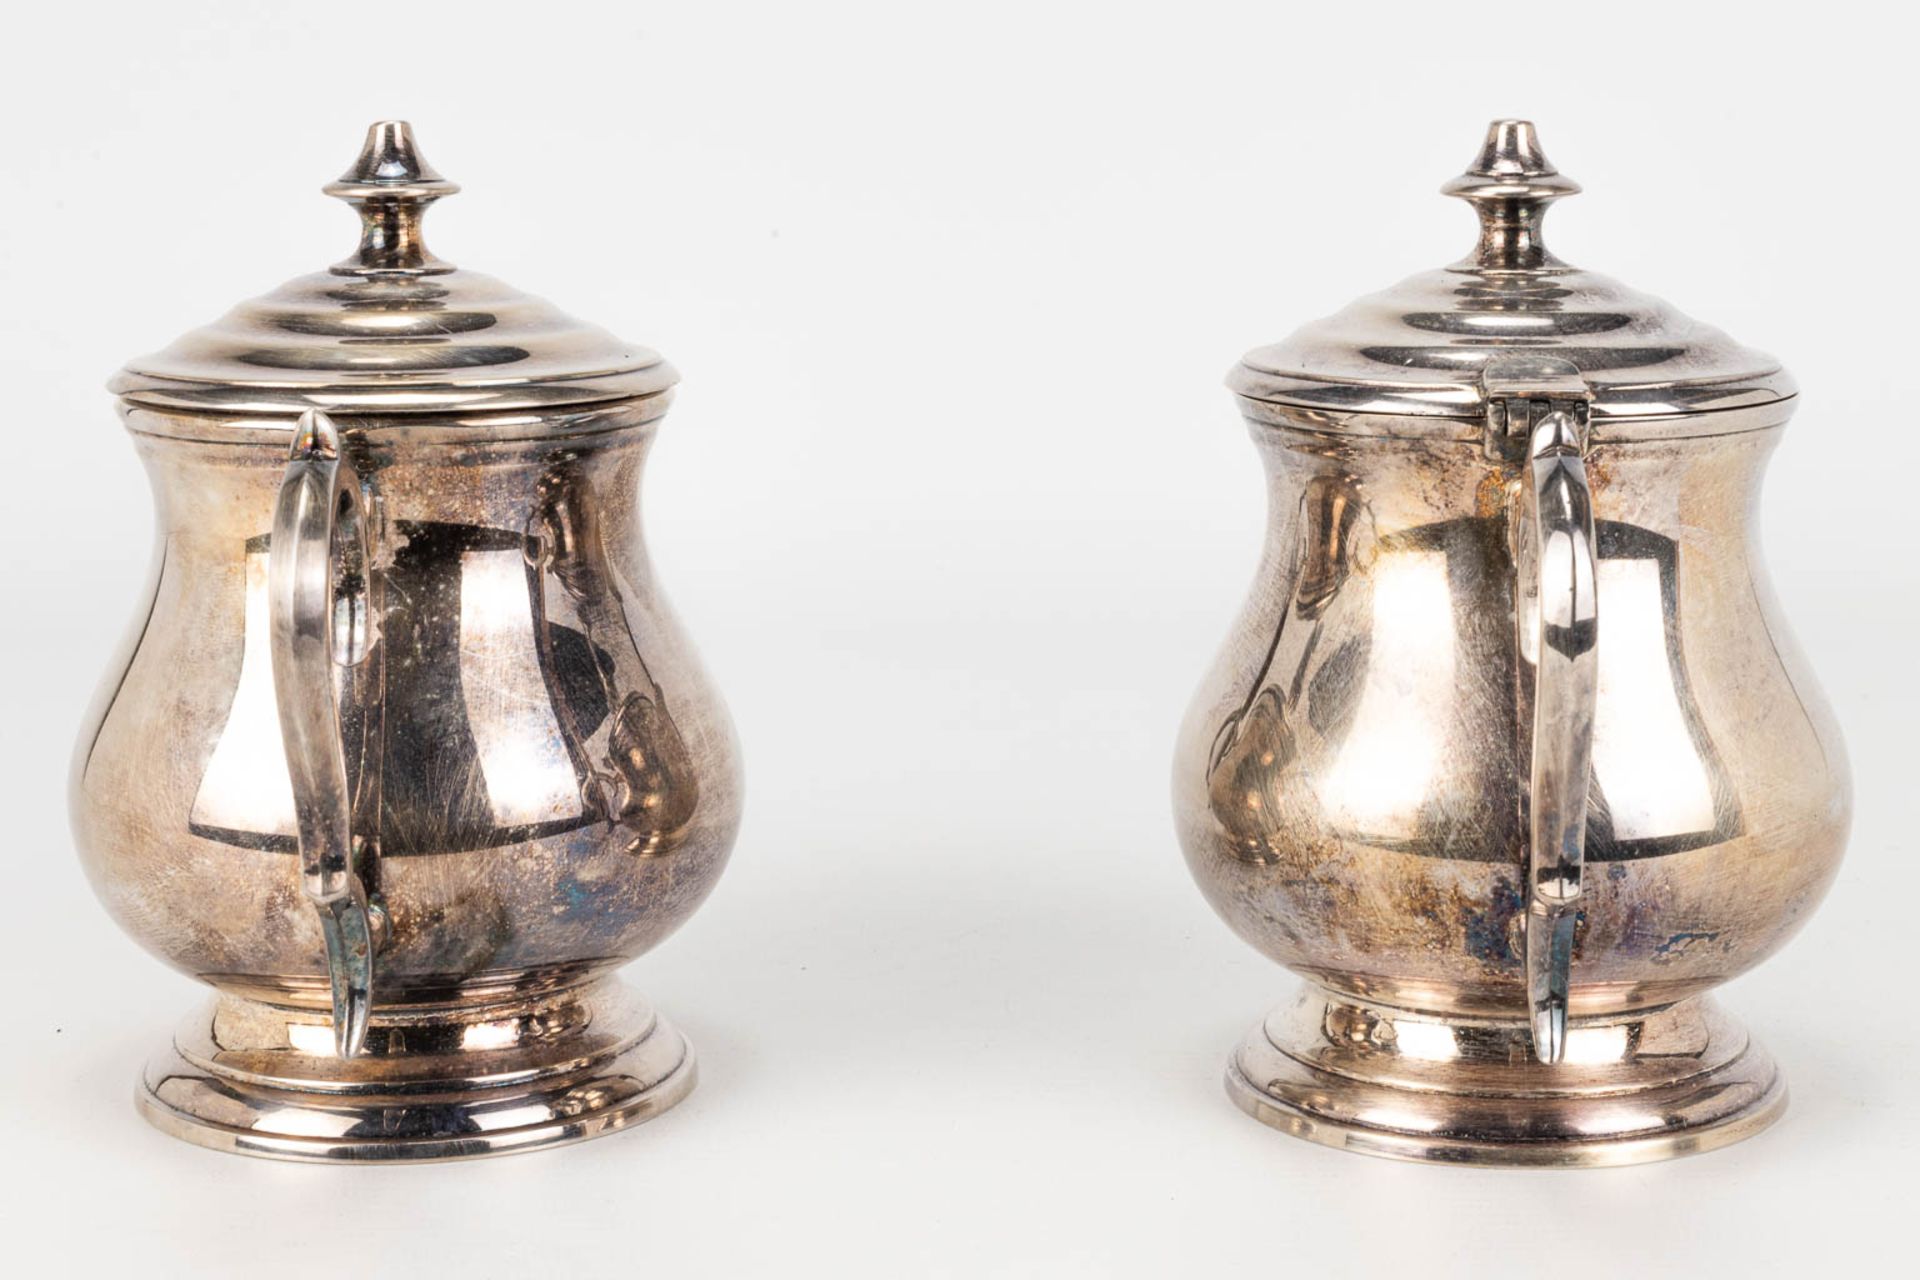 A coffee and tea service made of silver-plated metal. - Image 15 of 15